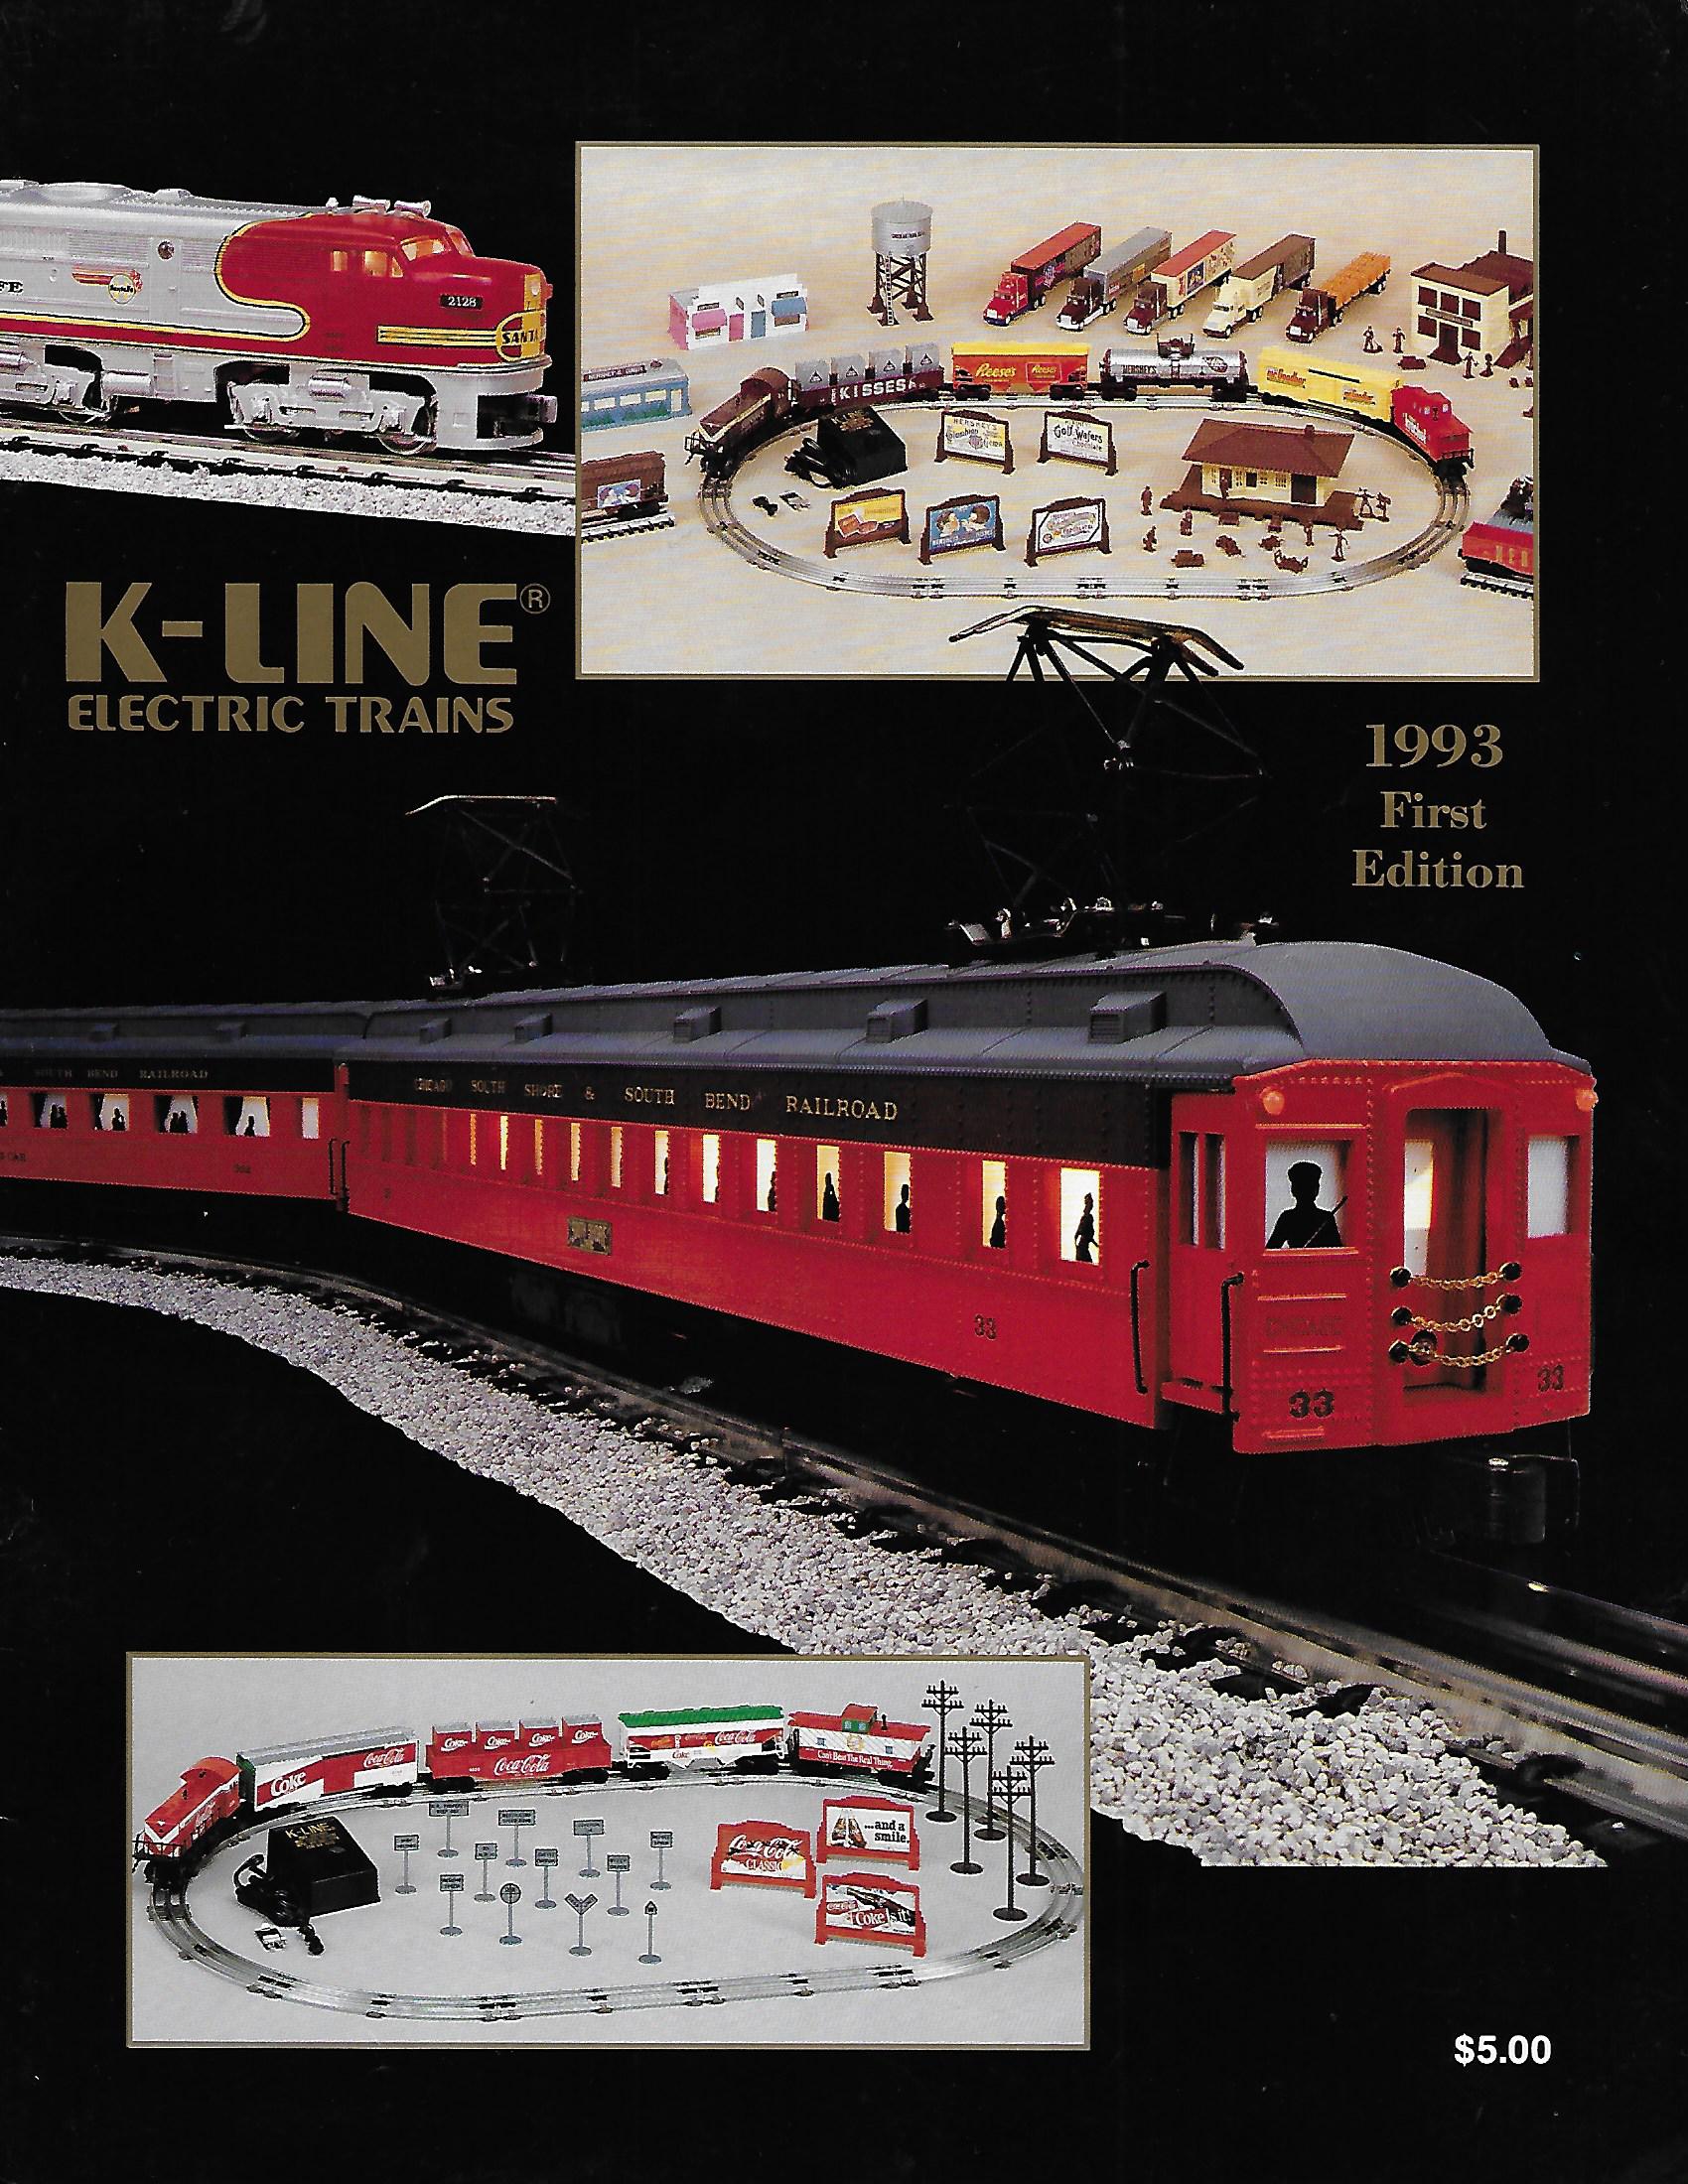 K-Line 1993 First Edition Catalog image